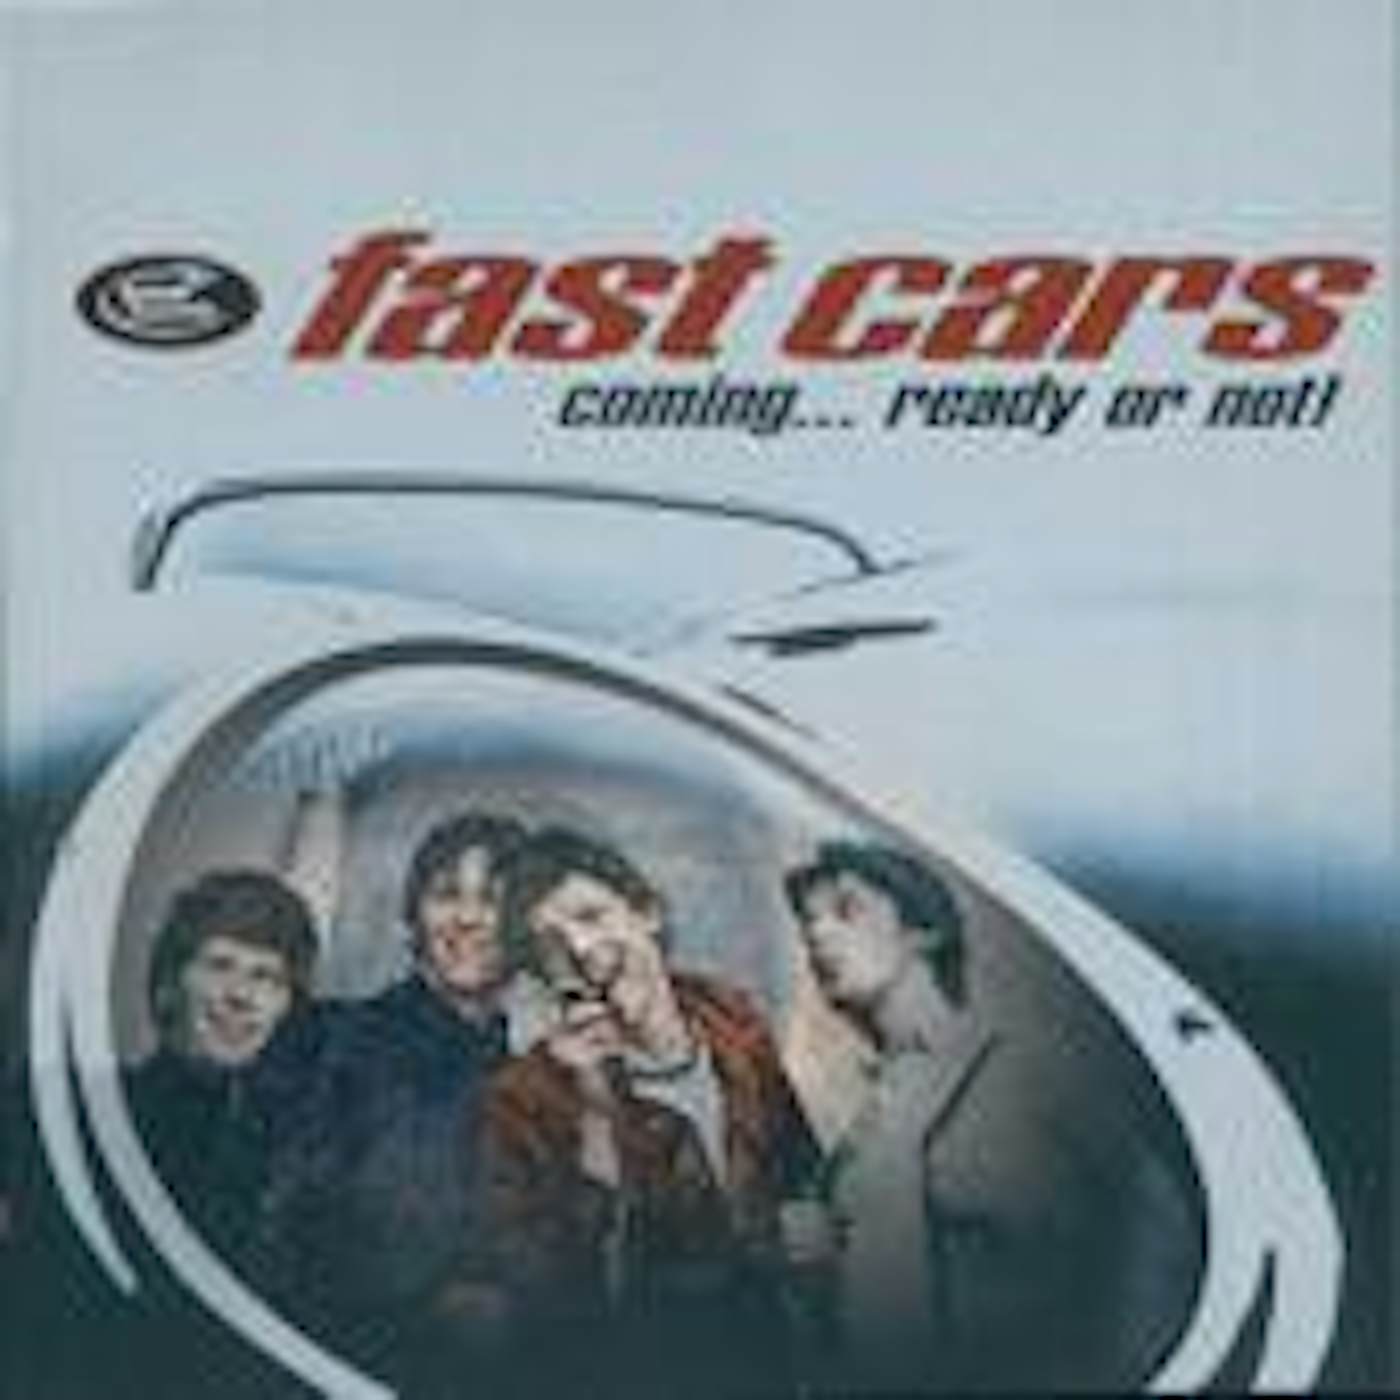 Fast Cars COMING READY OR NOT Vinyl Record